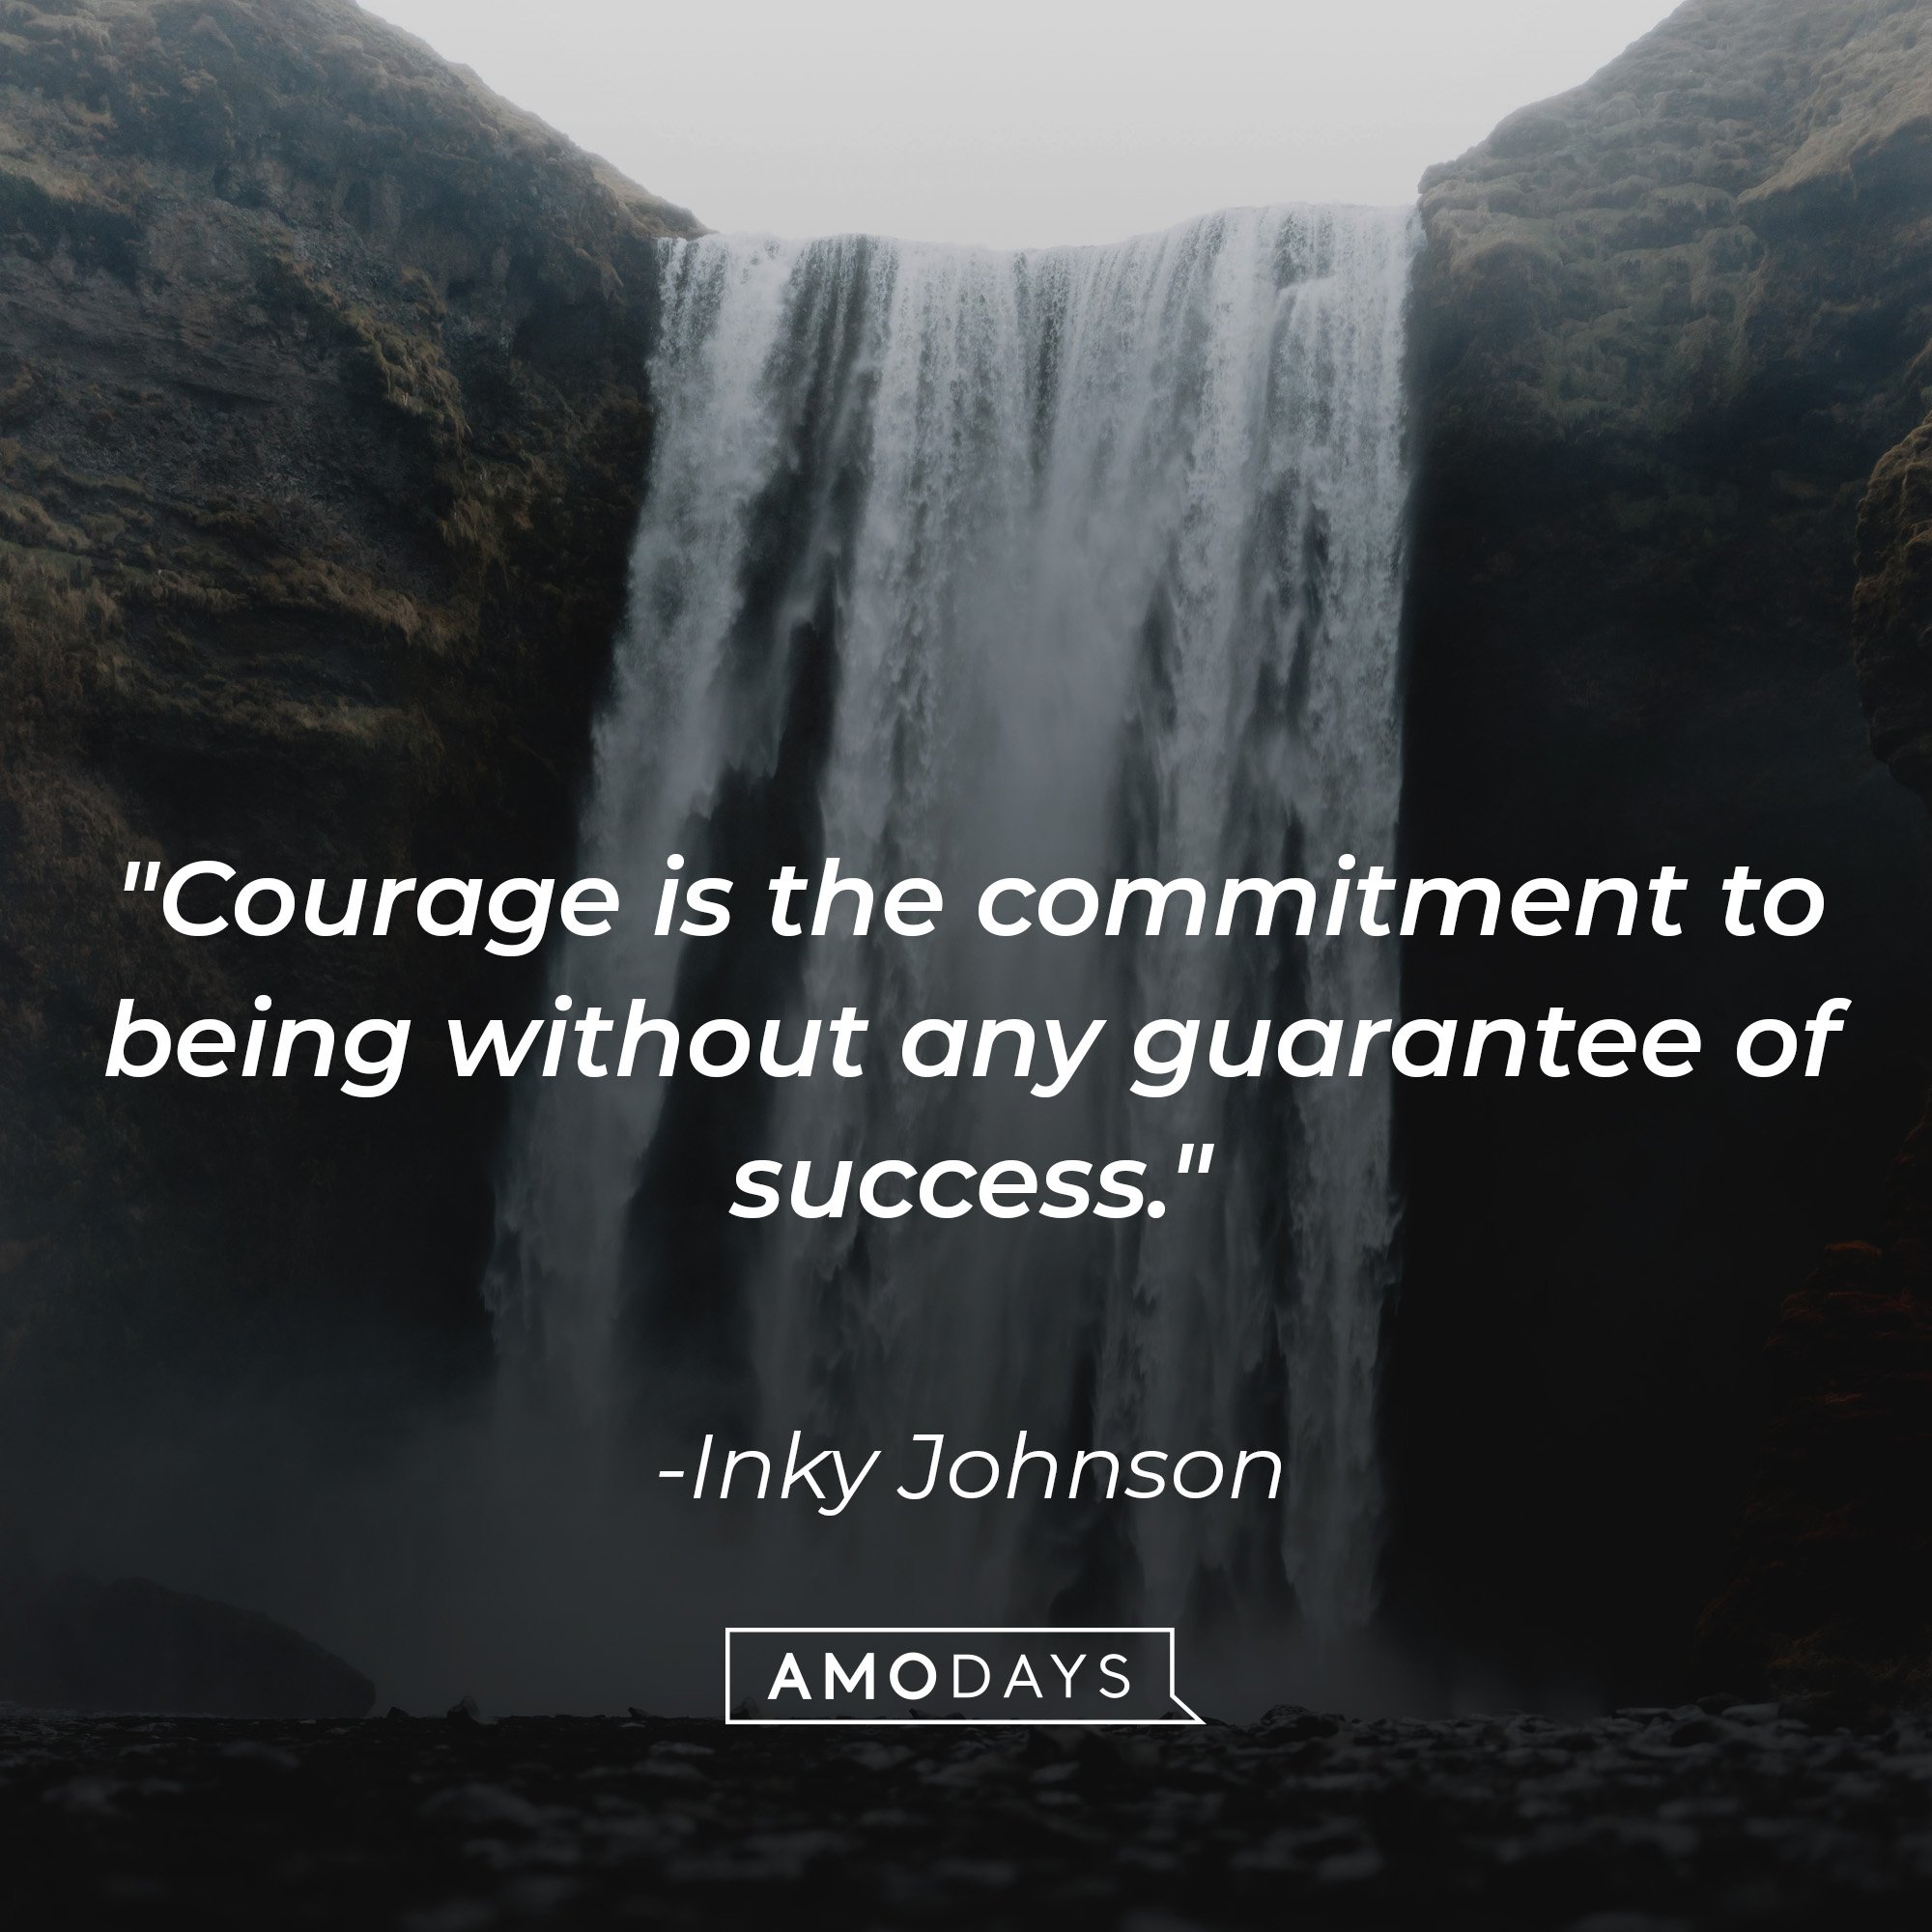 Inky Johnson's quote: "Courage is the commitment to being without any guarantee of success." | Image: AmoDays